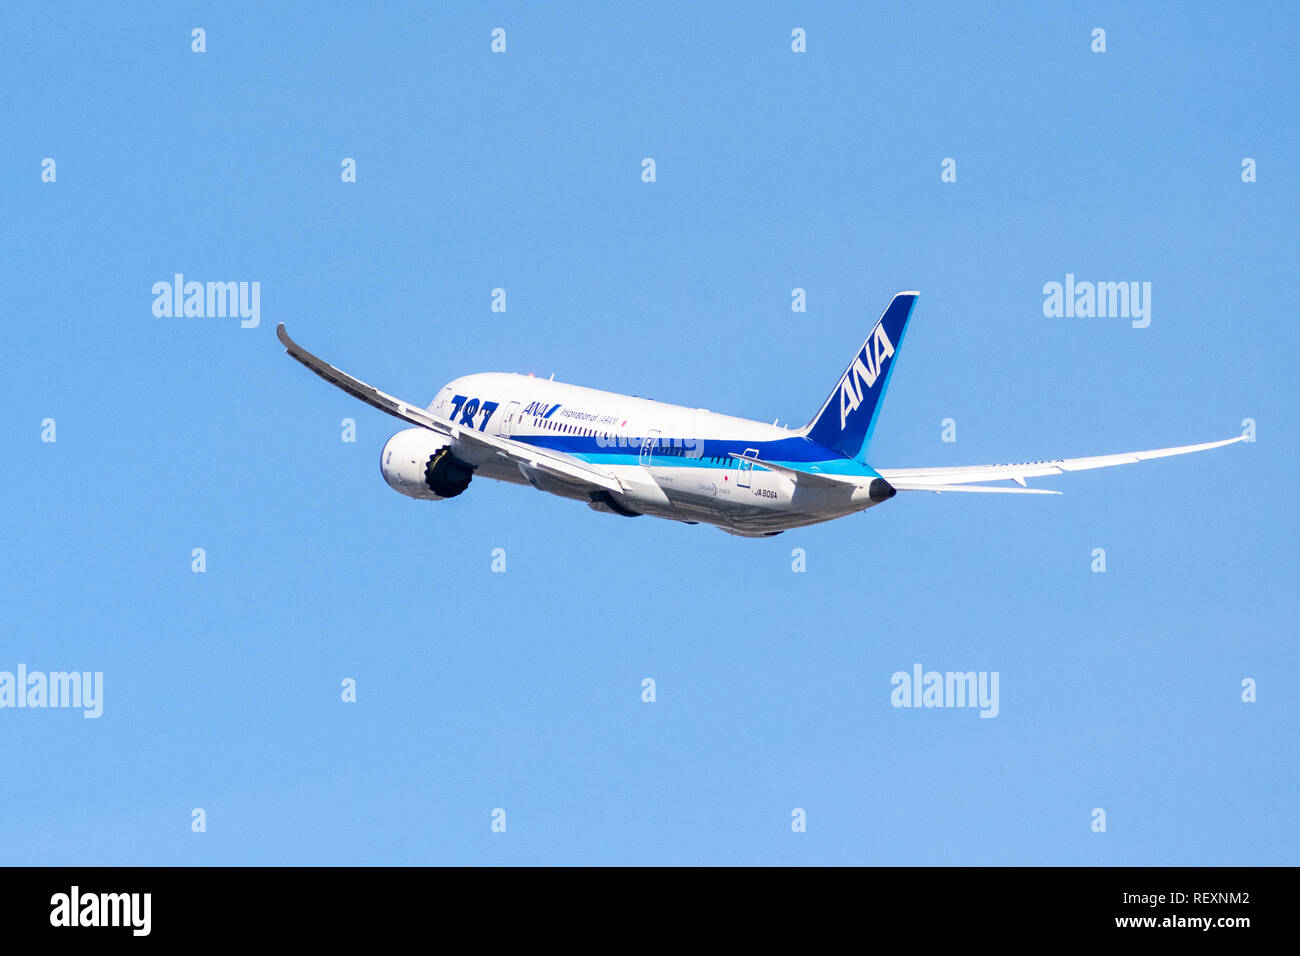 January 31, 2018 San Jose / CA / USA - ANA aircraft taking off from San Jose International Airport, Silicon Valley; All Nippon Airways Co., Ltd., also Stock Photo